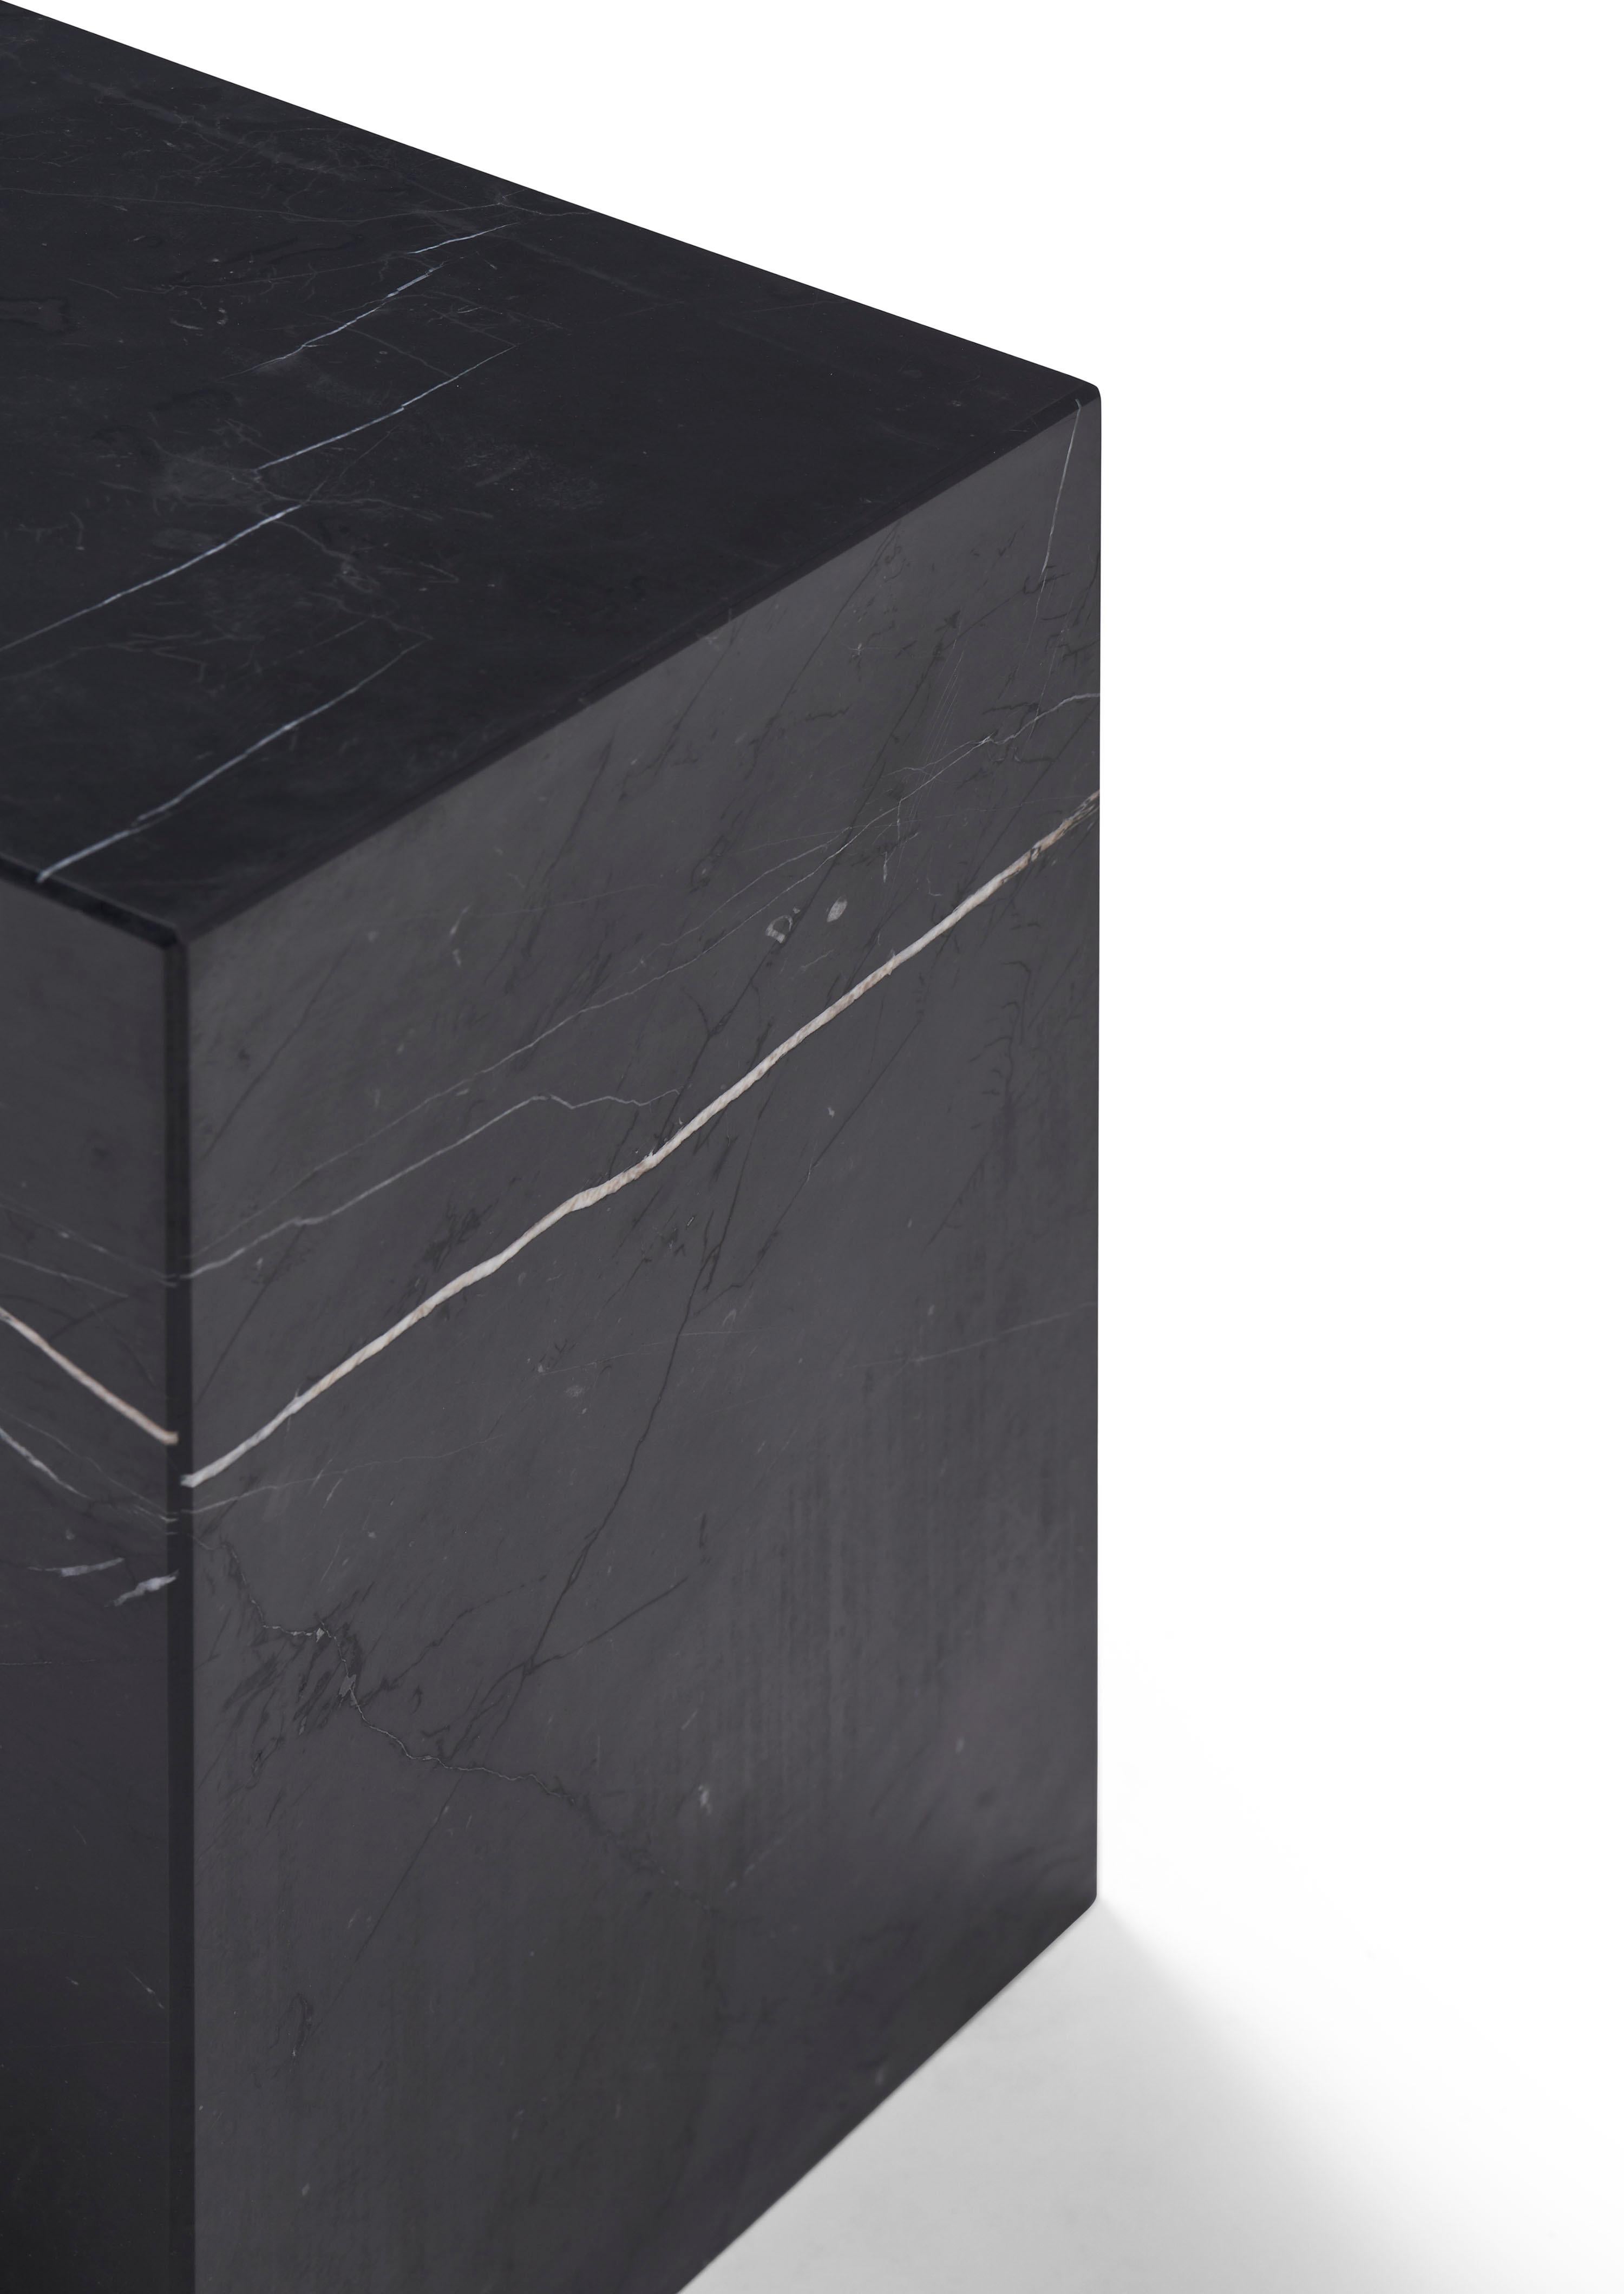 American Kilter Table, black marble side table For Sale